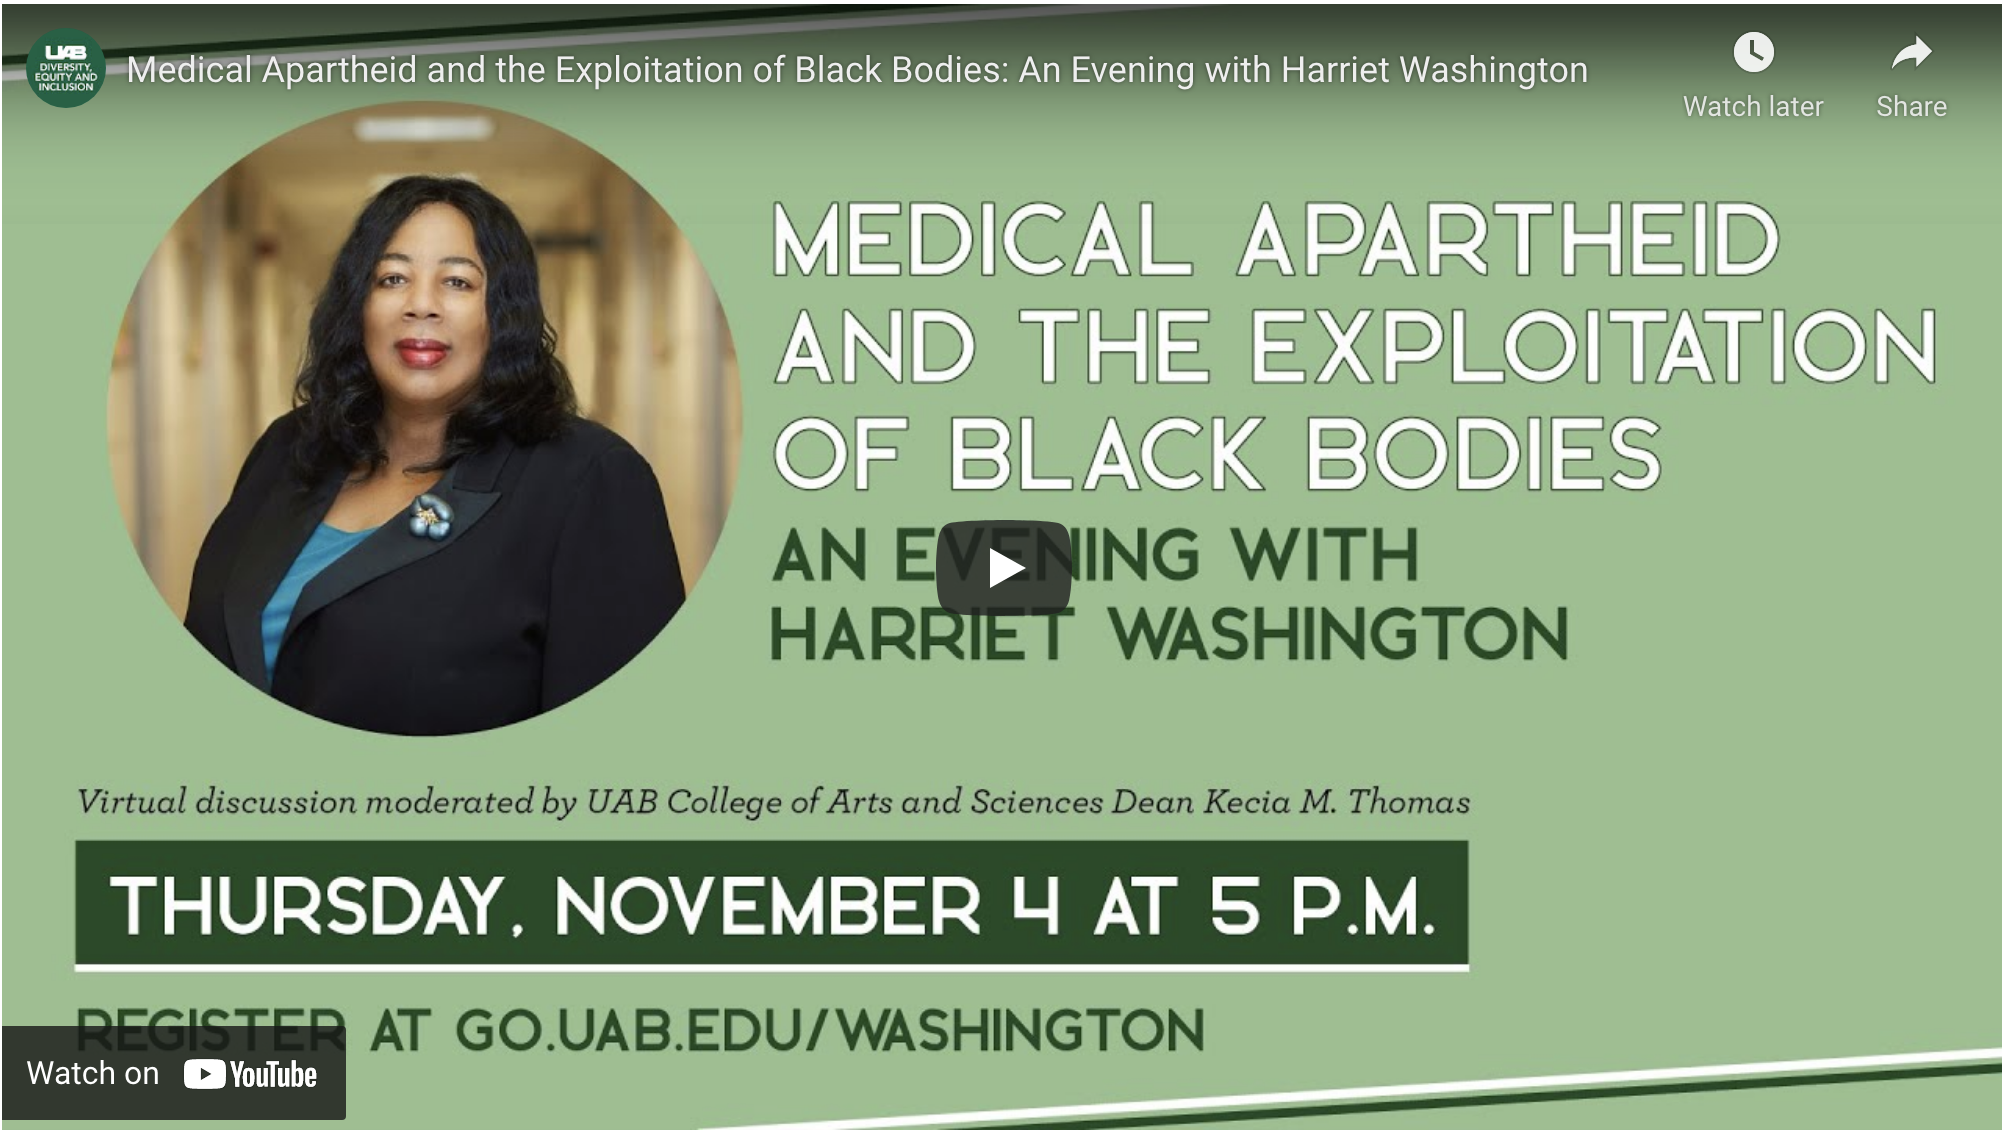 Medical Apartheid and the Exploitation of Black Bodies: An Evening with Harriet Washington